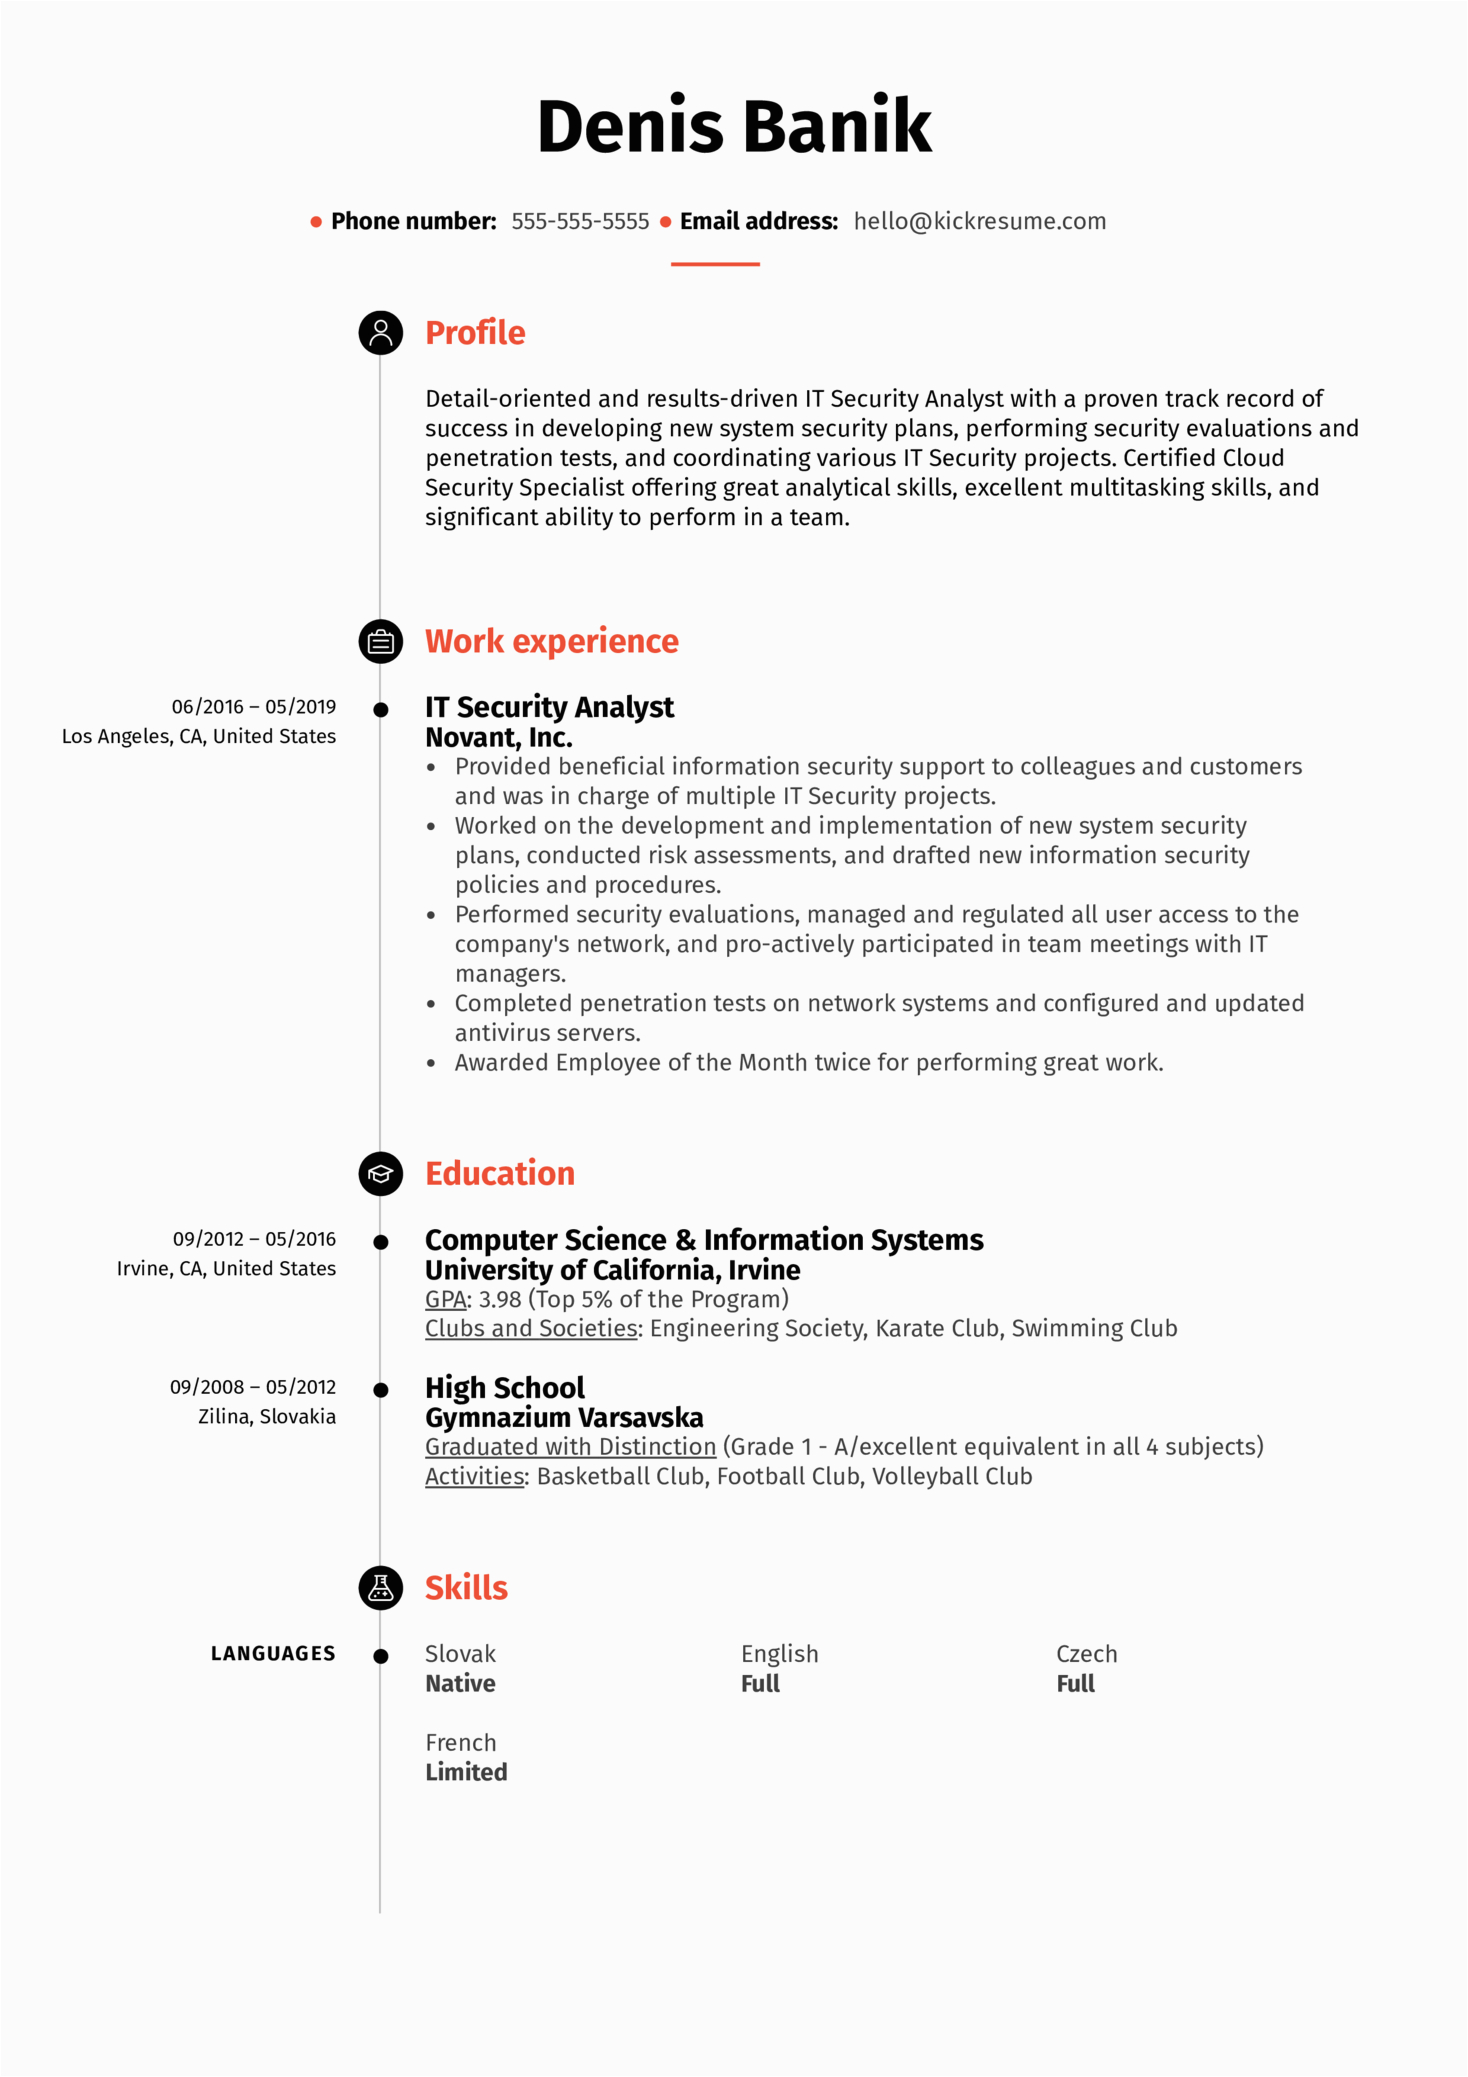 Sample Resume for It Security Analyst It Security Analyst Resume Sample